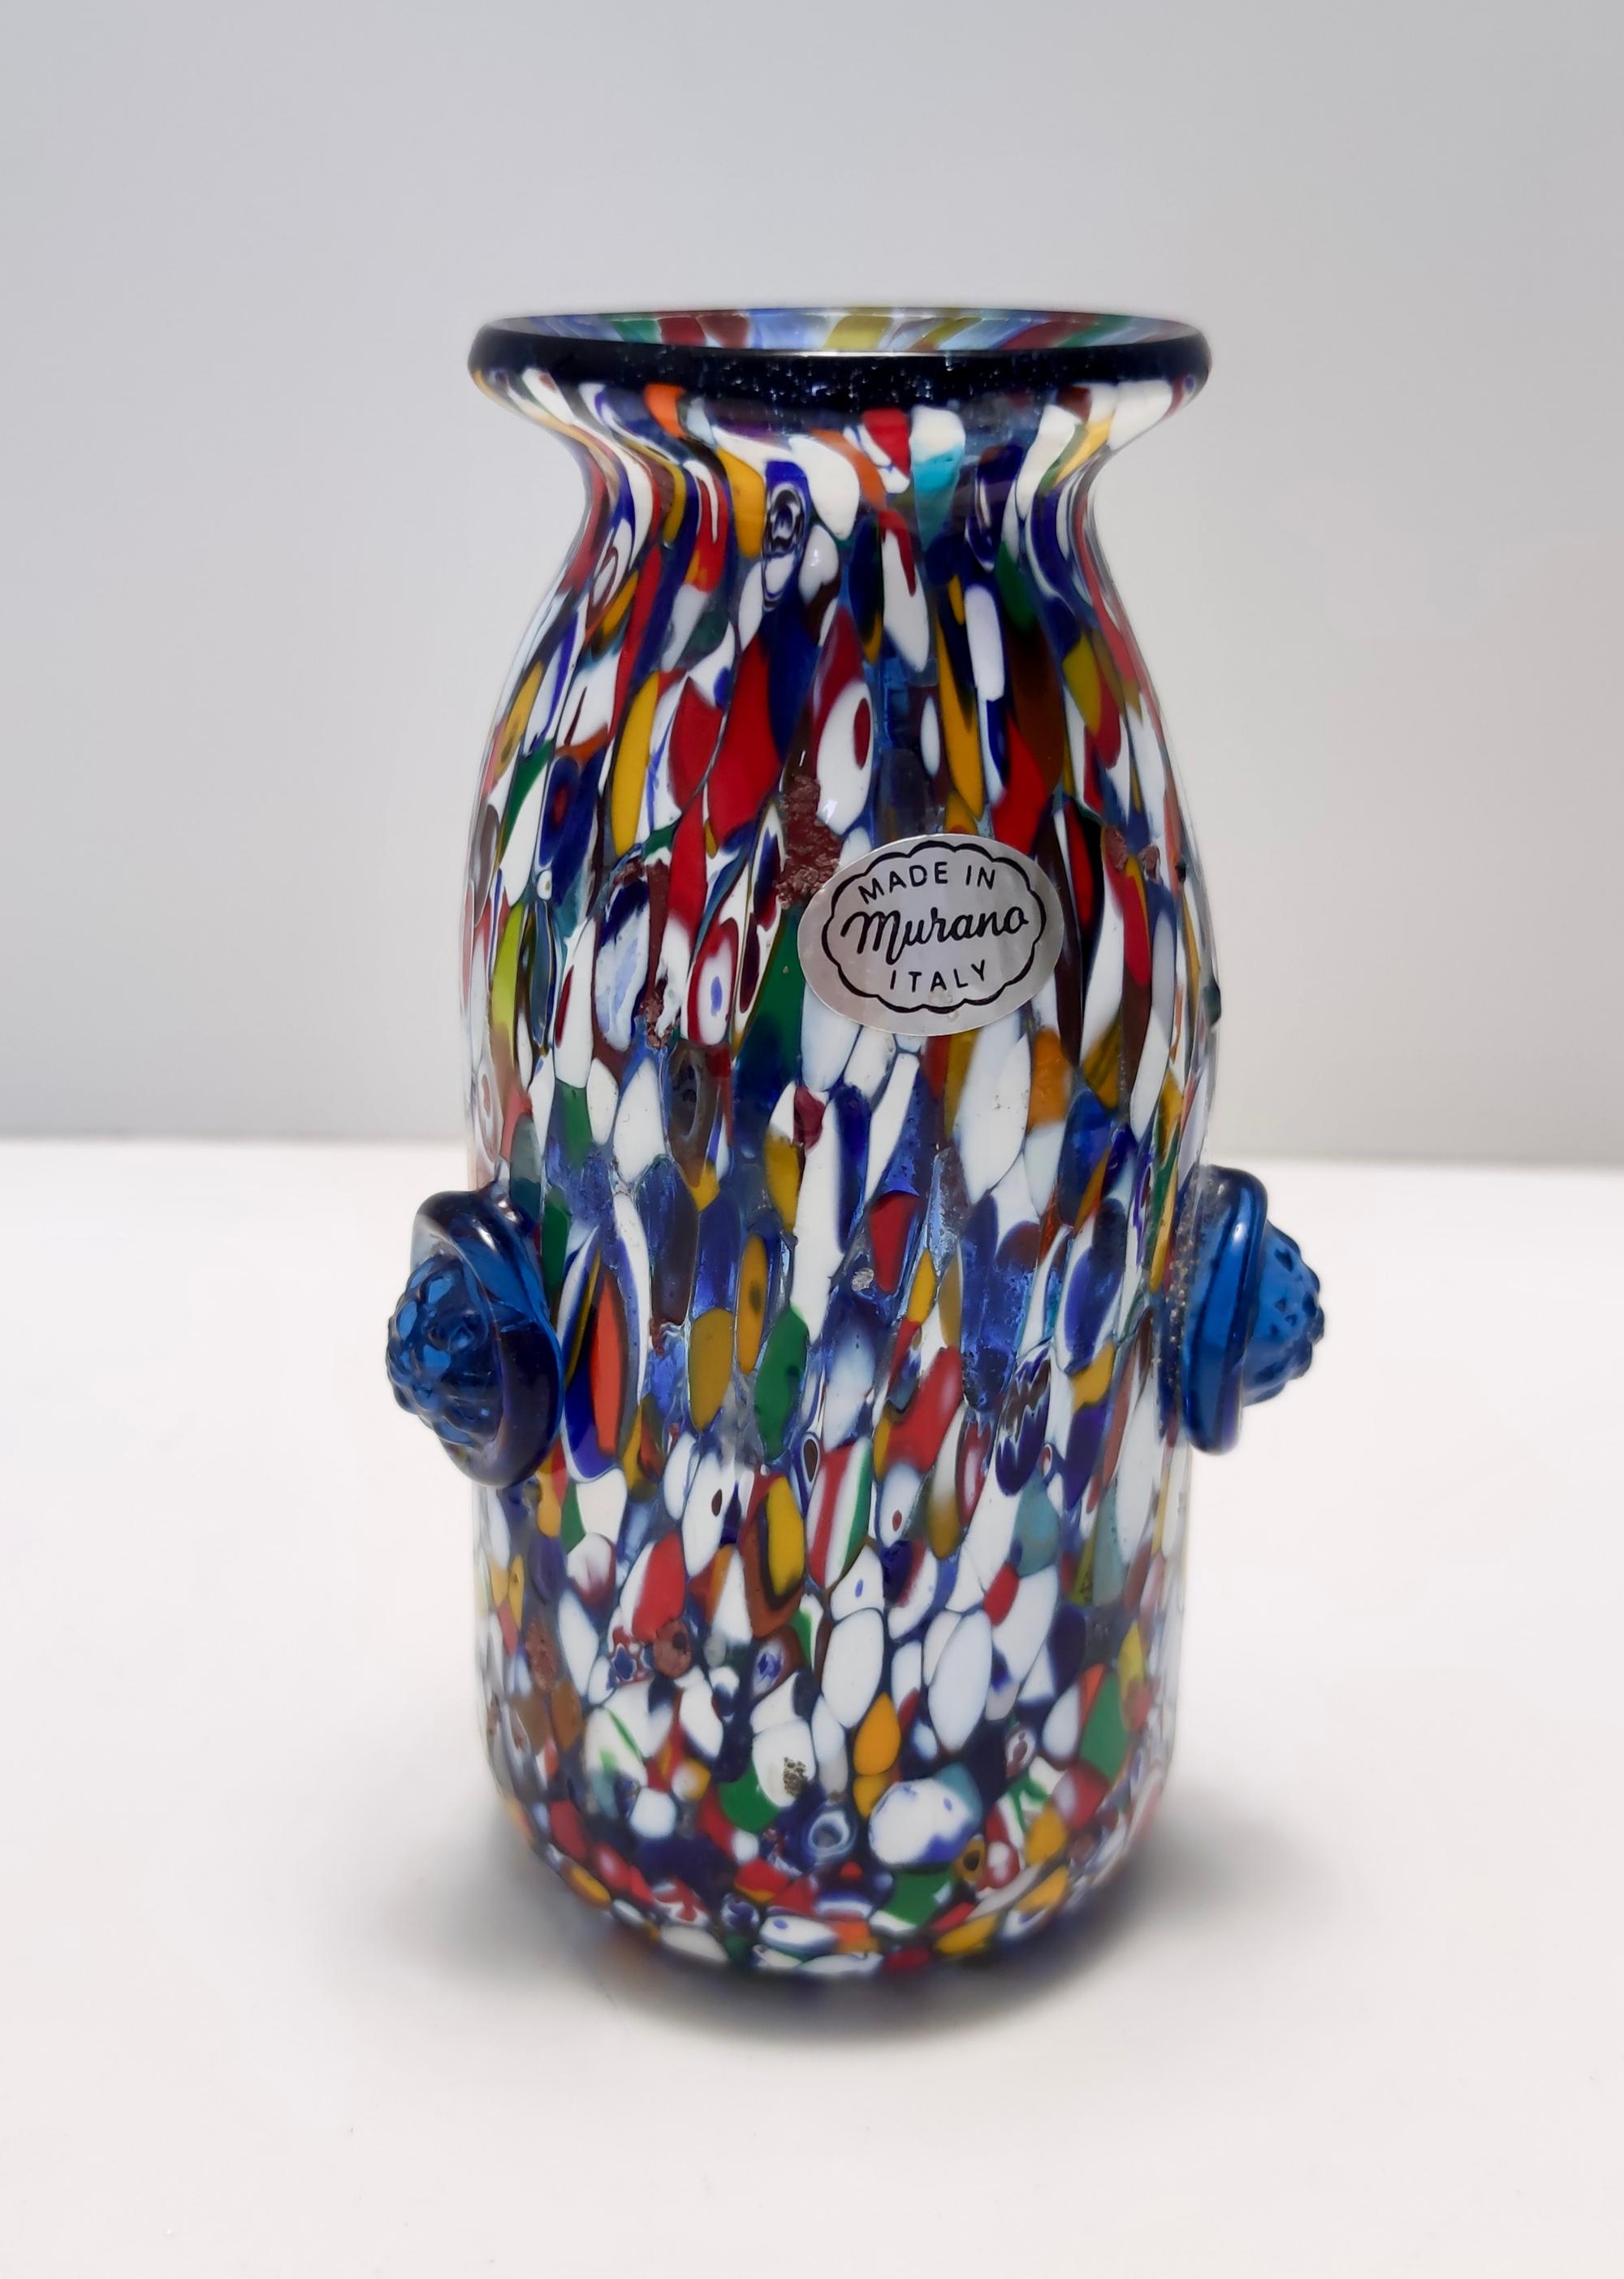 Italian Vintage Murano Glass Vase Attributed to Fratelli Toso with Murrines, Italy For Sale